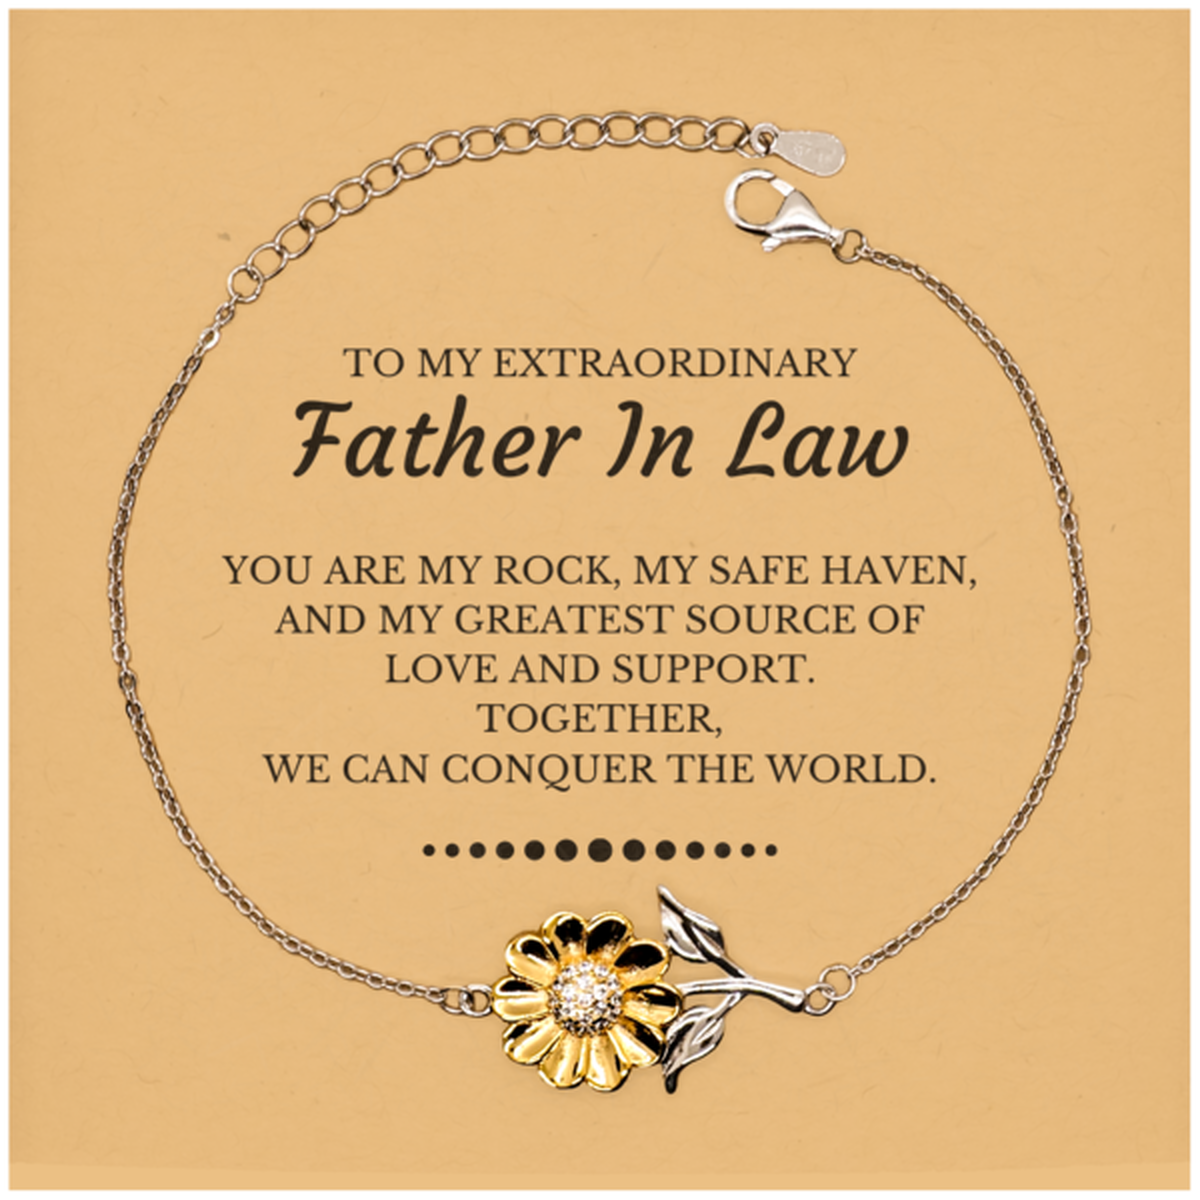 To My Extraordinary Father In Law Gifts, Together, we can conquer the world, Birthday Christmas Sunflower Bracelet For Father In Law, Christmas Gifts For Father In Law